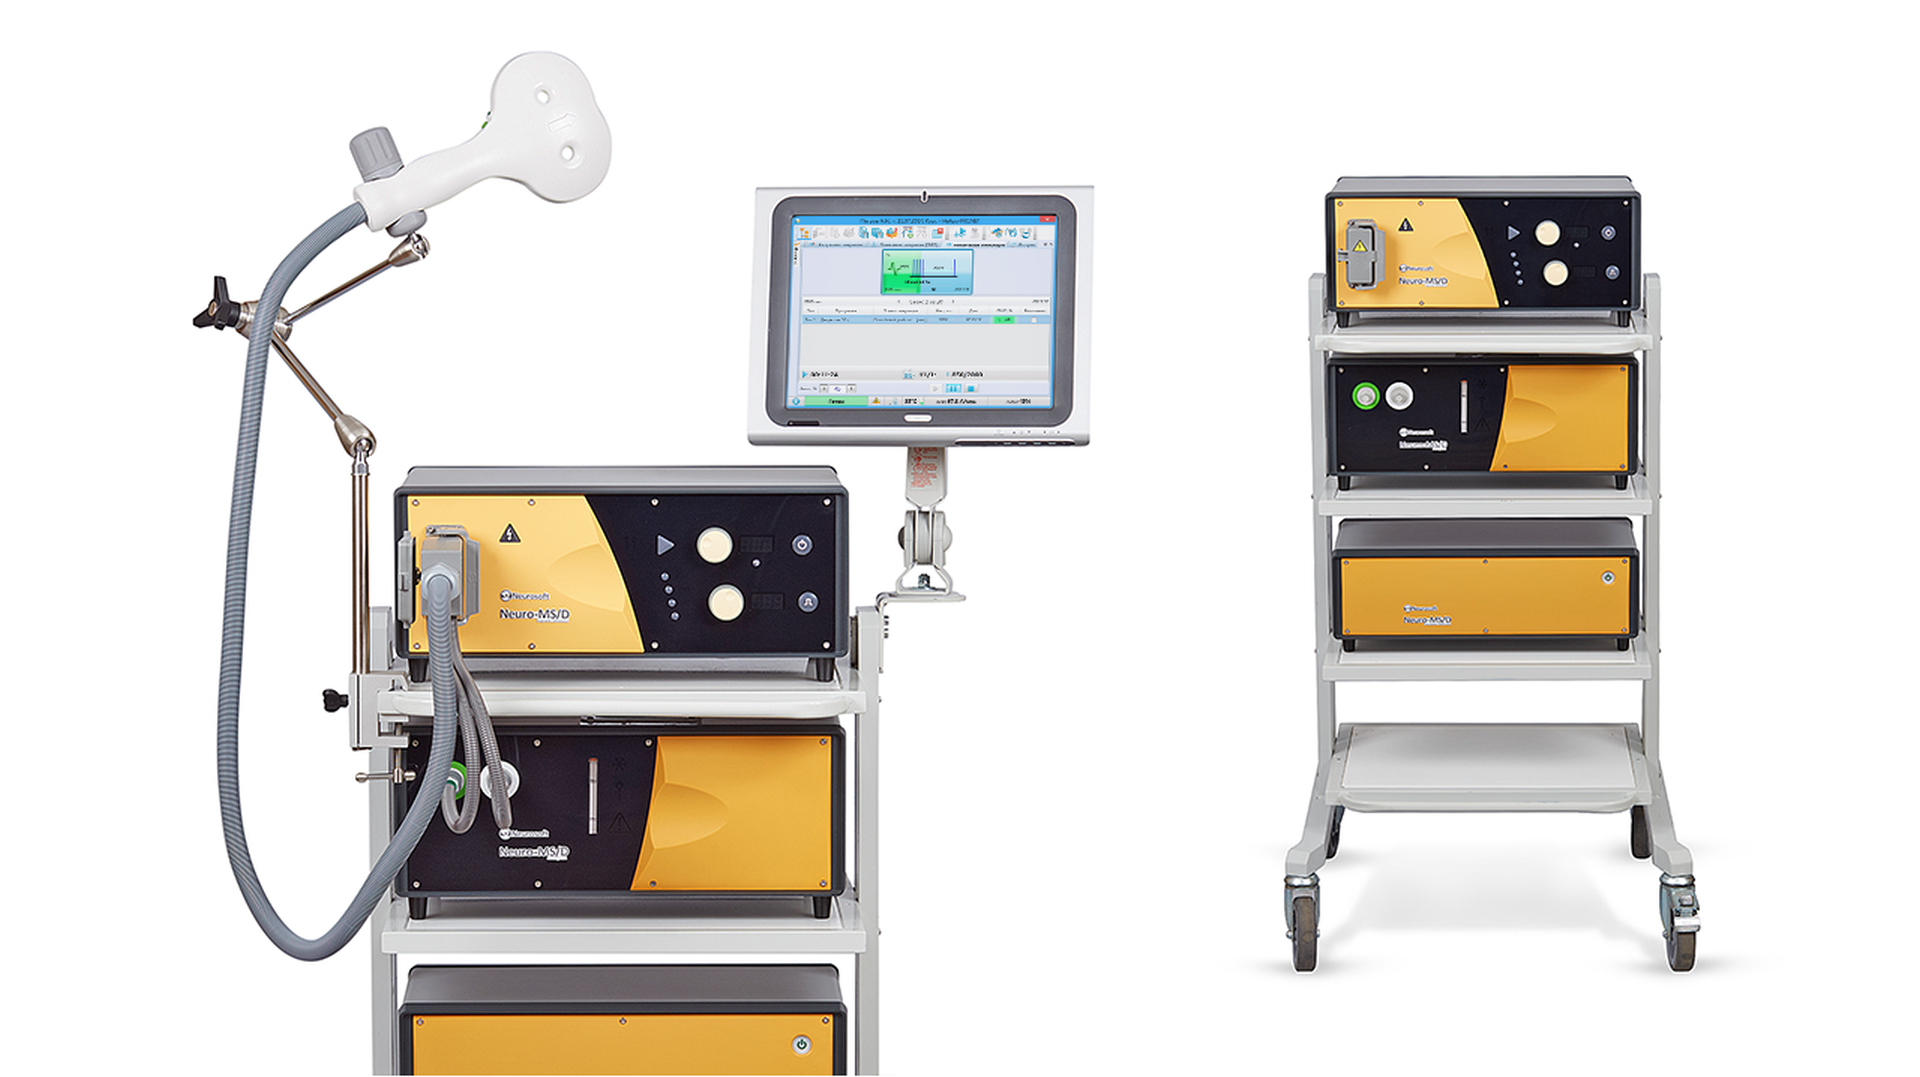  Medical equipment with digital display